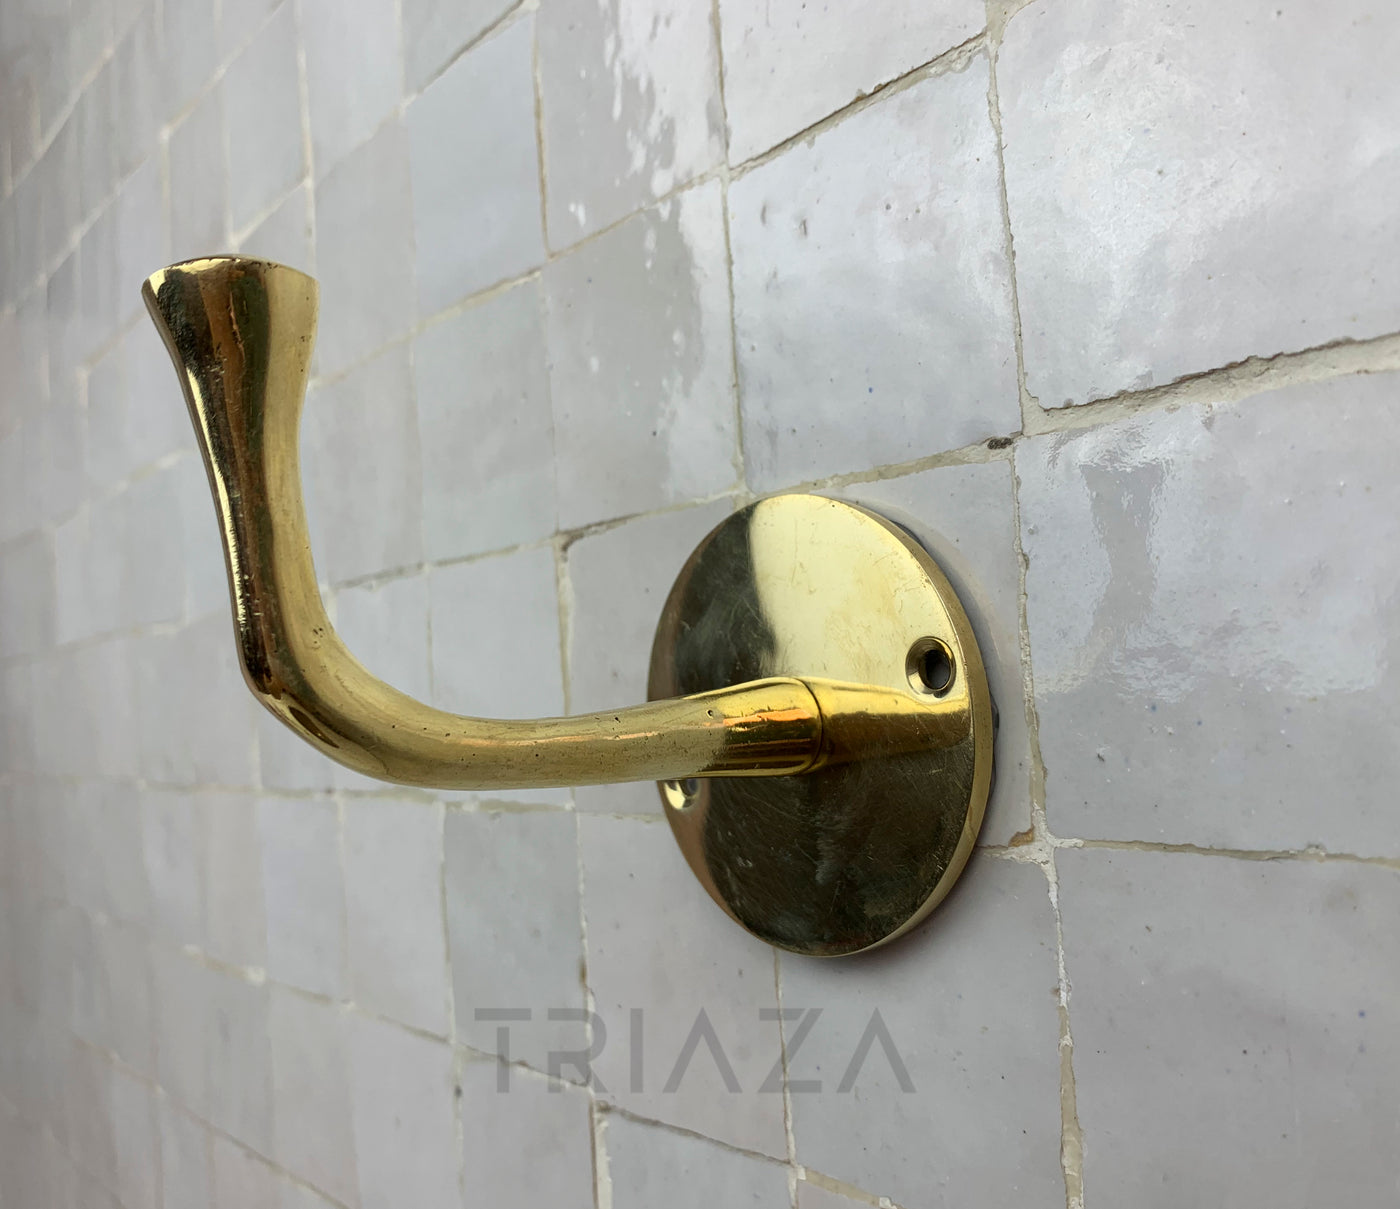 Handcrafted Unlacquered brass hooks for wall - Triazadesigns